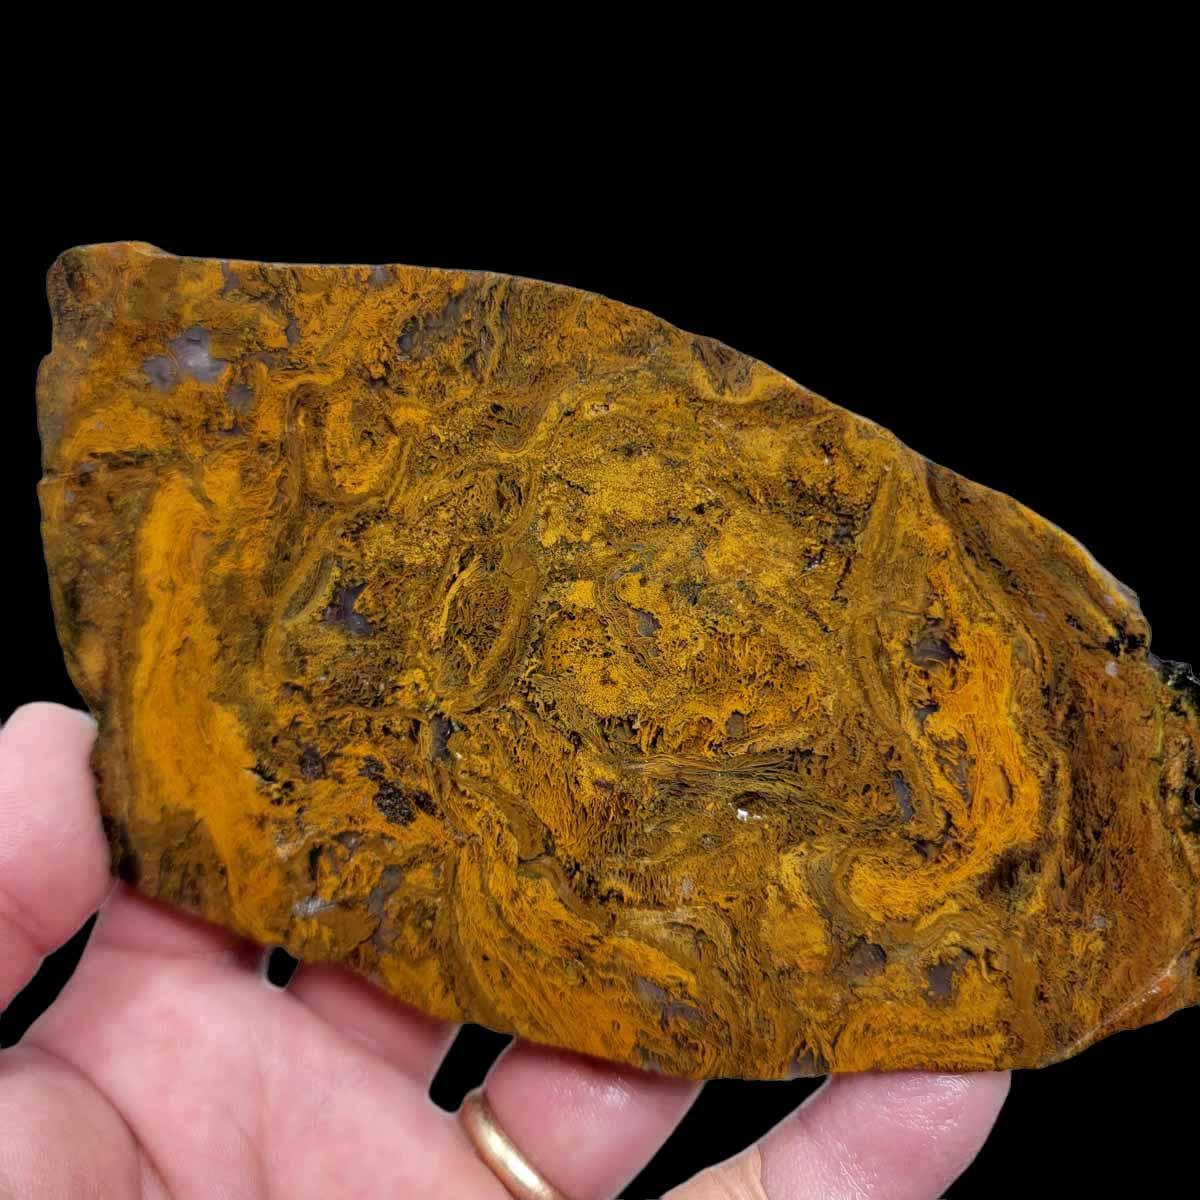 Maury Mountain Moss Agate Slab!  Lapidary Stone Slab! - LapidaryCentral